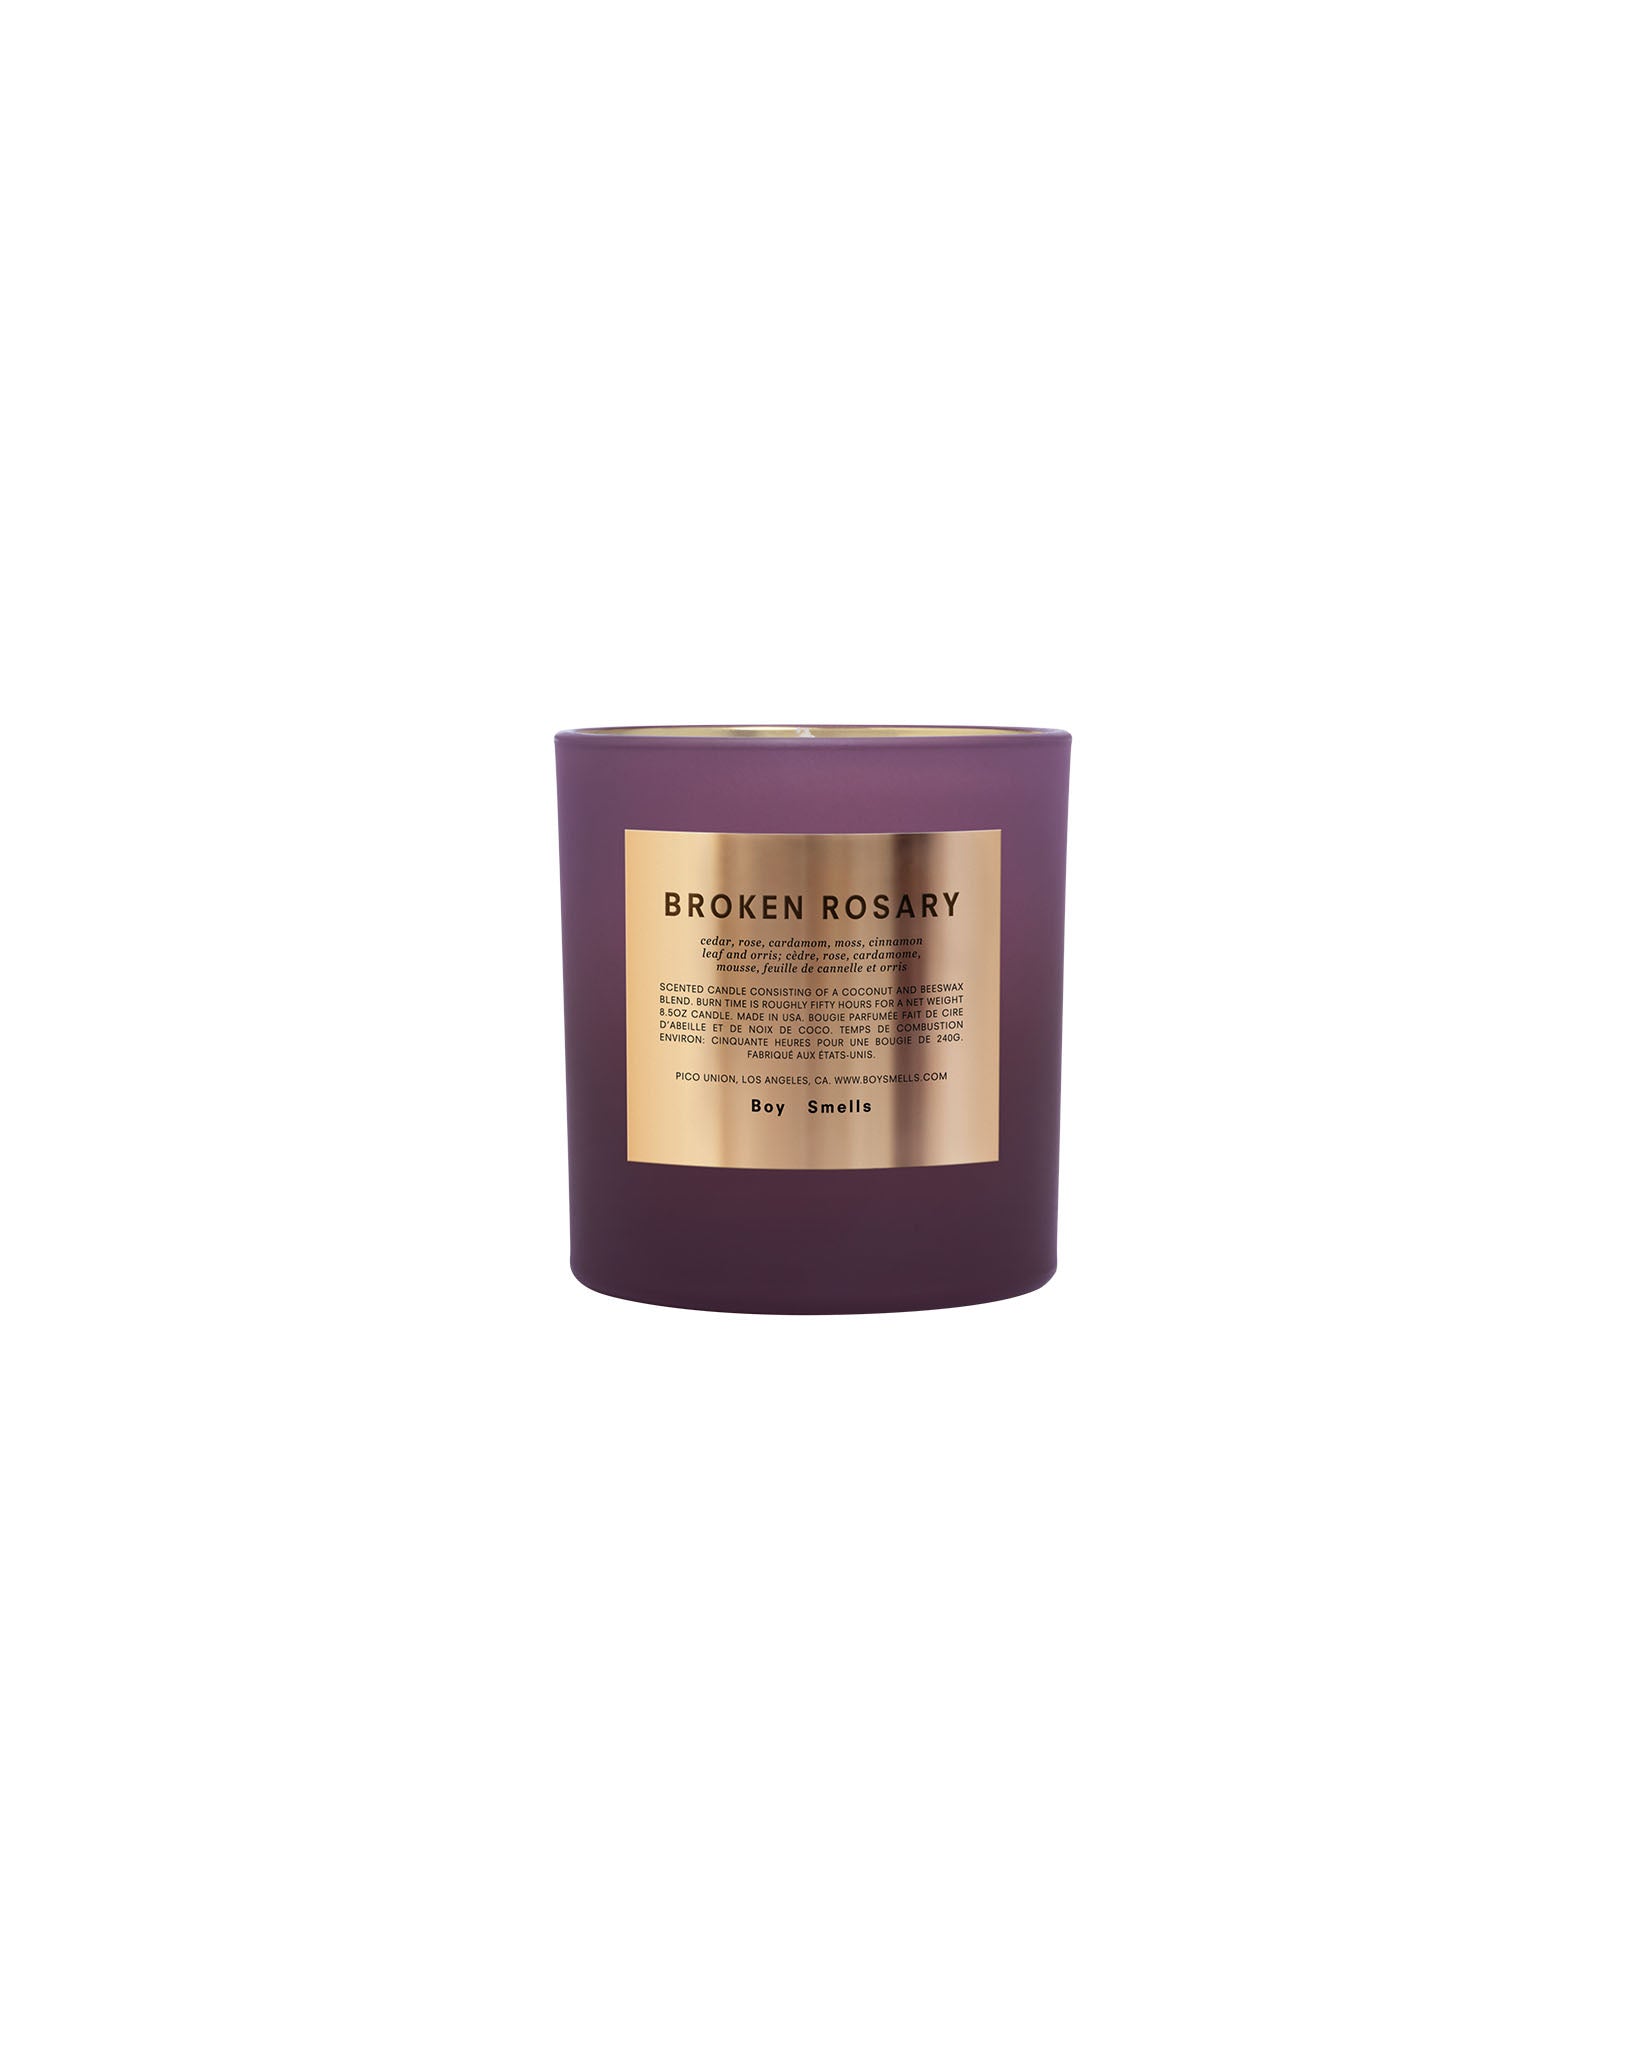 Holiday Rituals Broken Rosary Scented Candle 240g